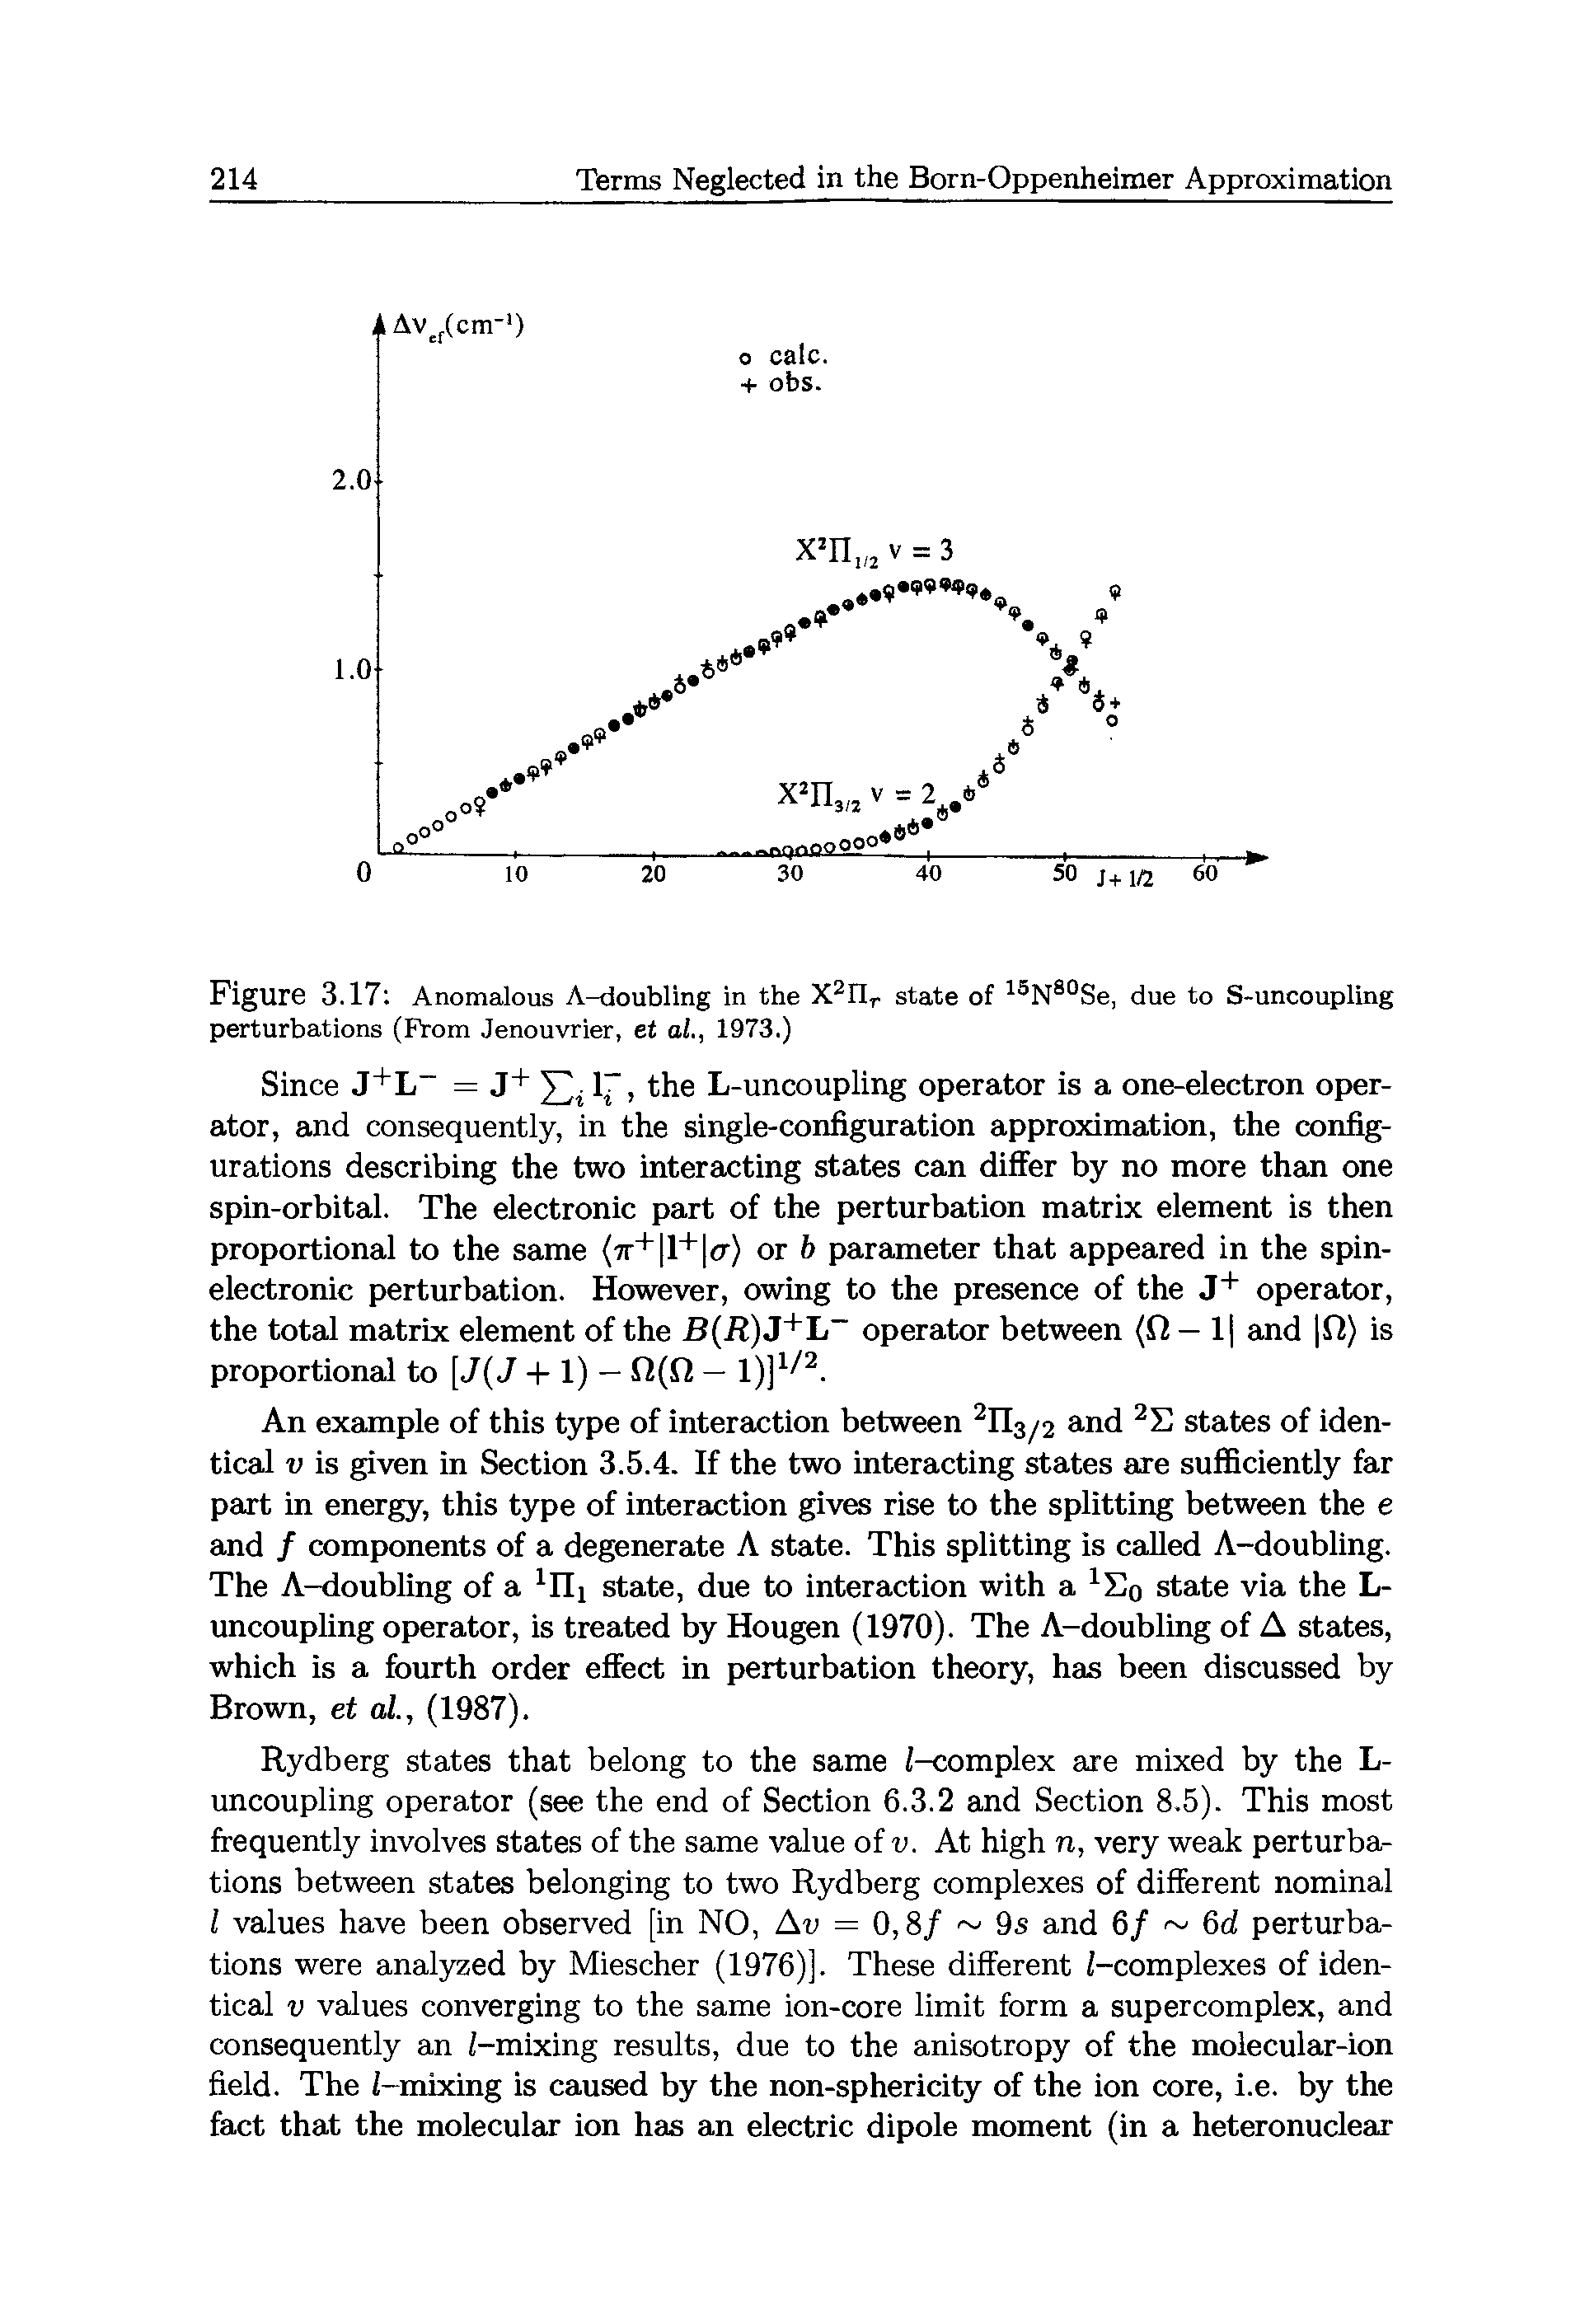 Figure 3.17 Anomalous A-doubling in the X2nr state of 15N80Se, due to S-uncoupling perturbations (From Jenouvrier, et al., 1973.)...